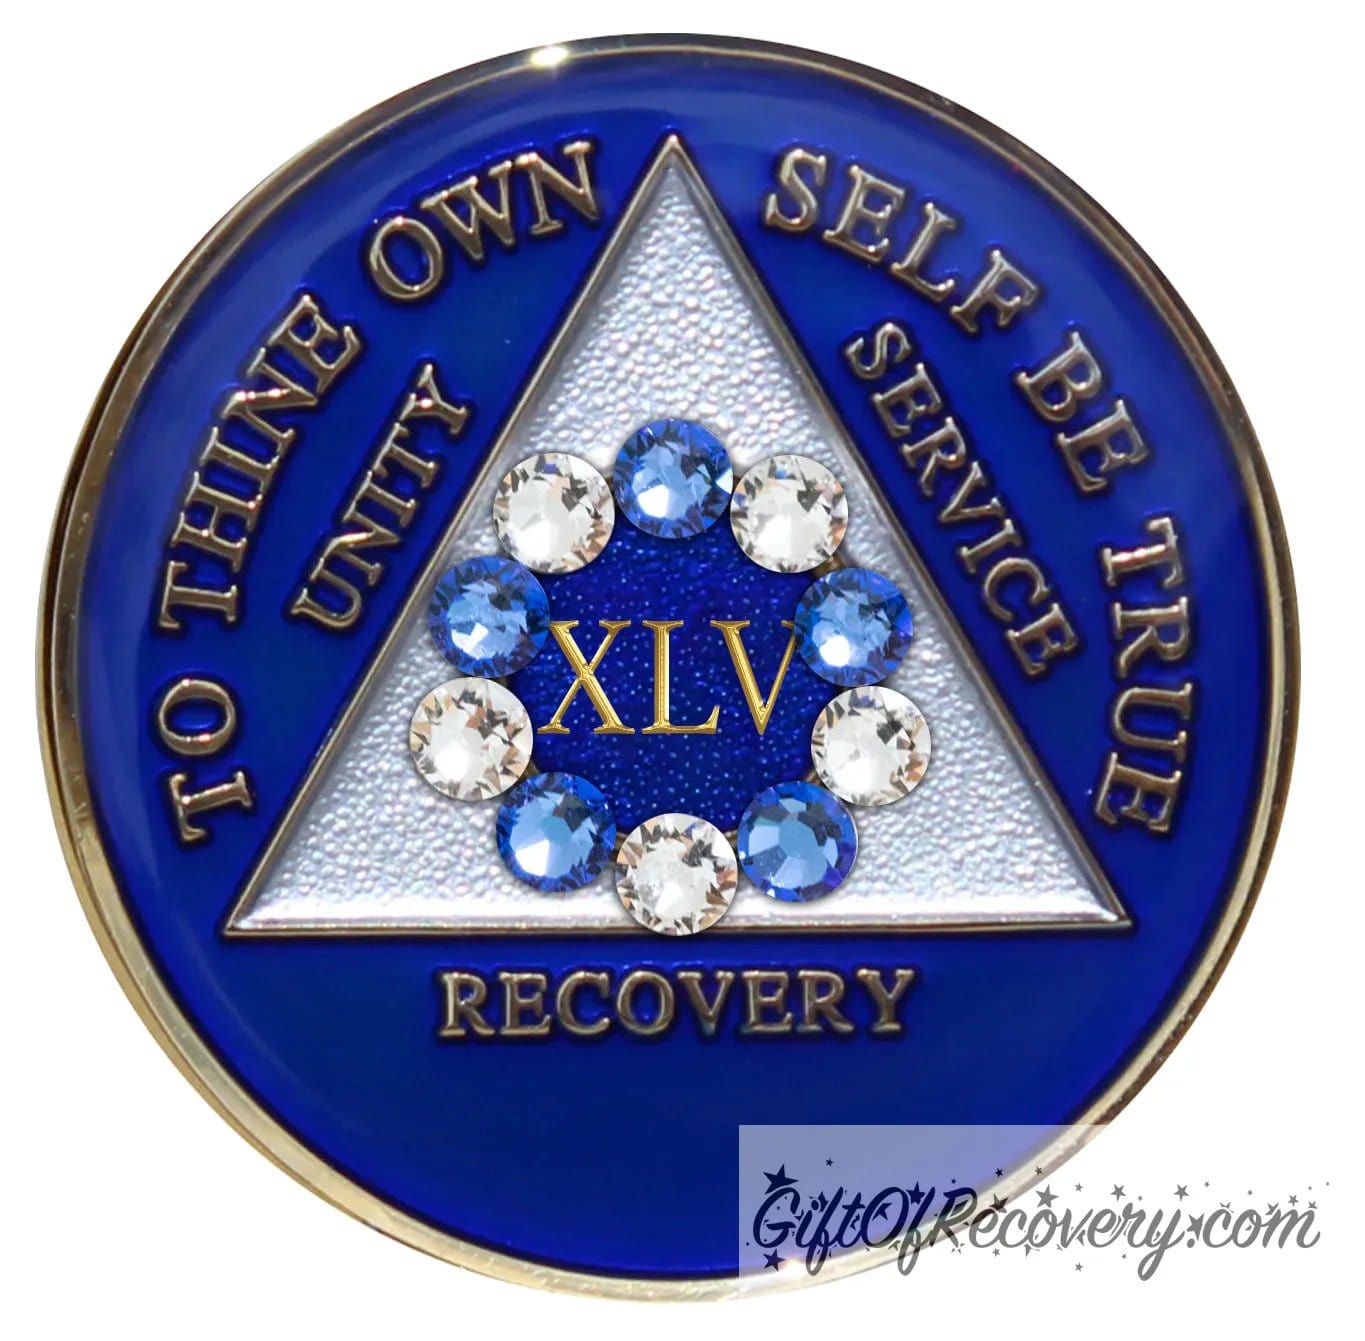 45 Year Big Book Blue AA medallion with 5 blue genuine crystals and 5 clear genuine crystal, making a circle around the 45 year, the recovery medallion has raised lettering to thine own self be true, and the outer rim of the medallion in 14k gold, inside the triangle is white and blue, emphasizing action and reflection.